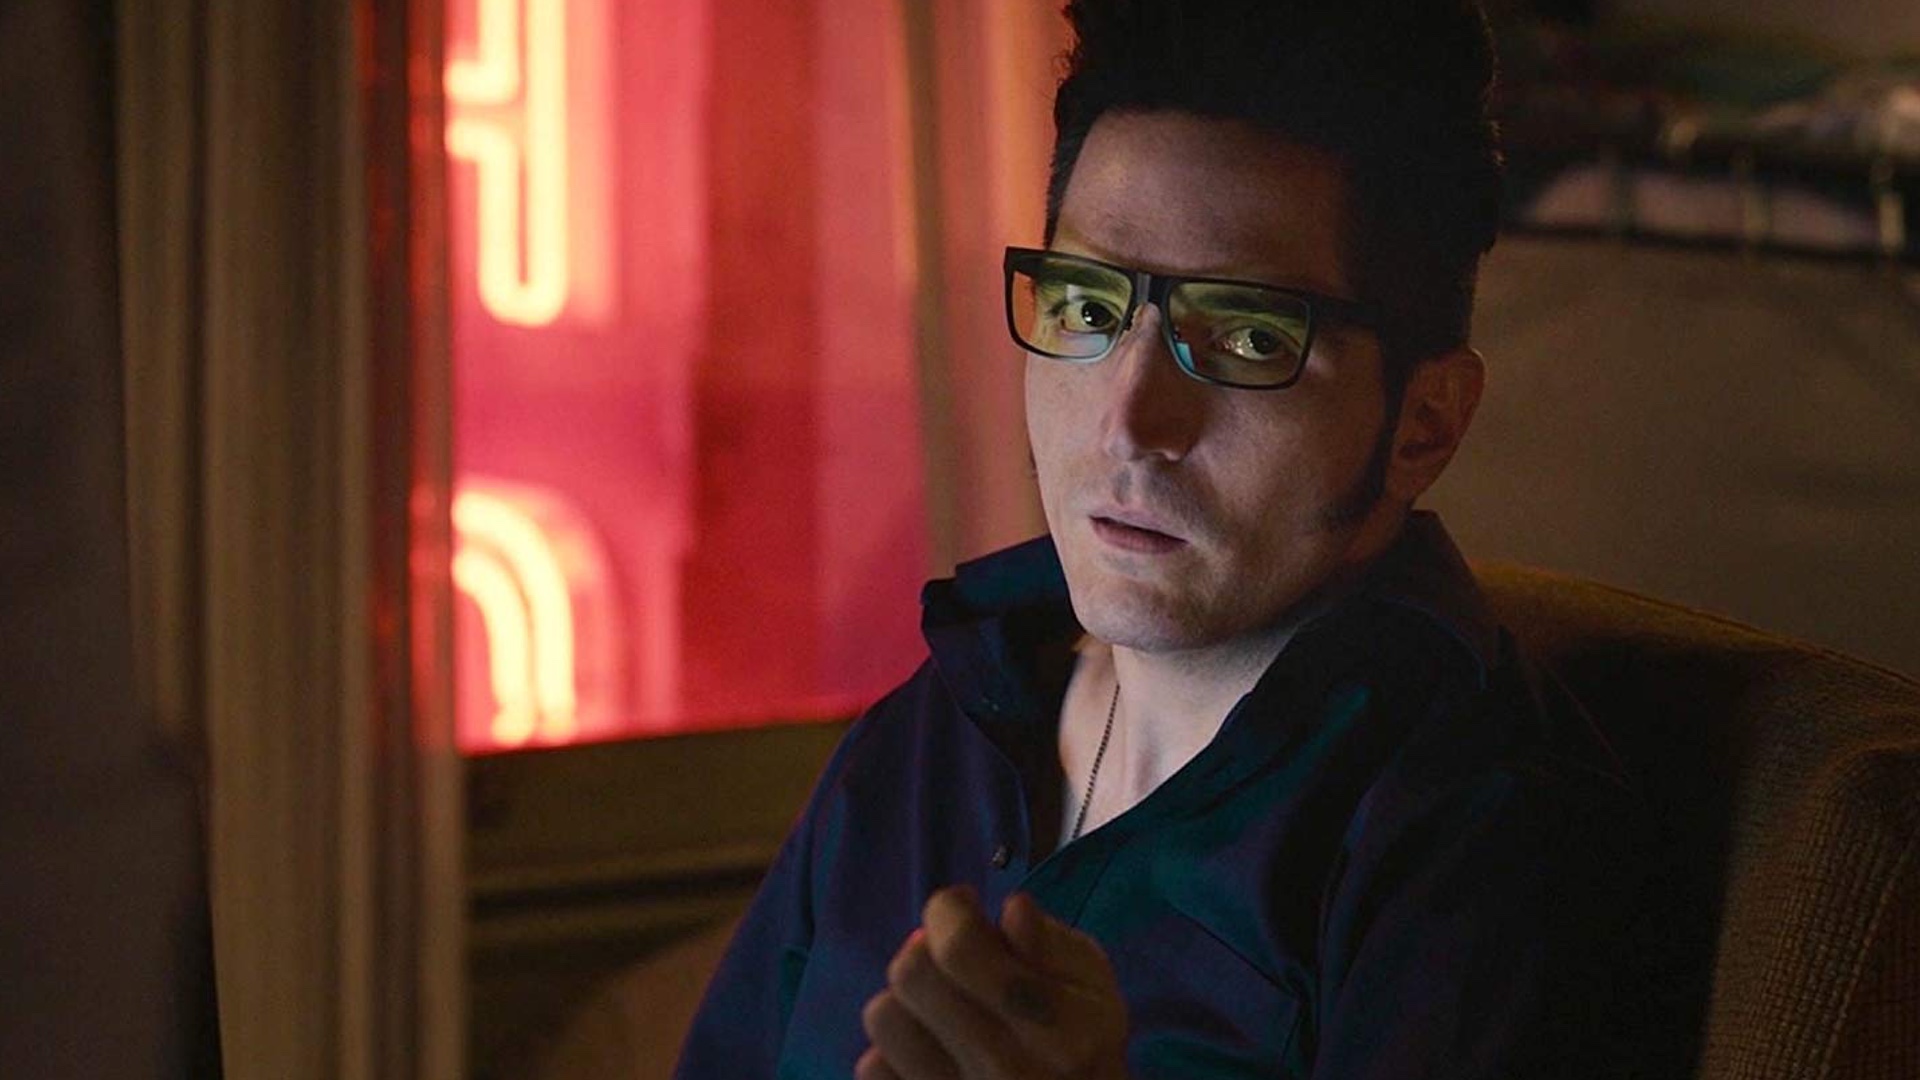 ANT-MAN Actor David Dastmalchian Cast in THE SUICIDE SQUAD as